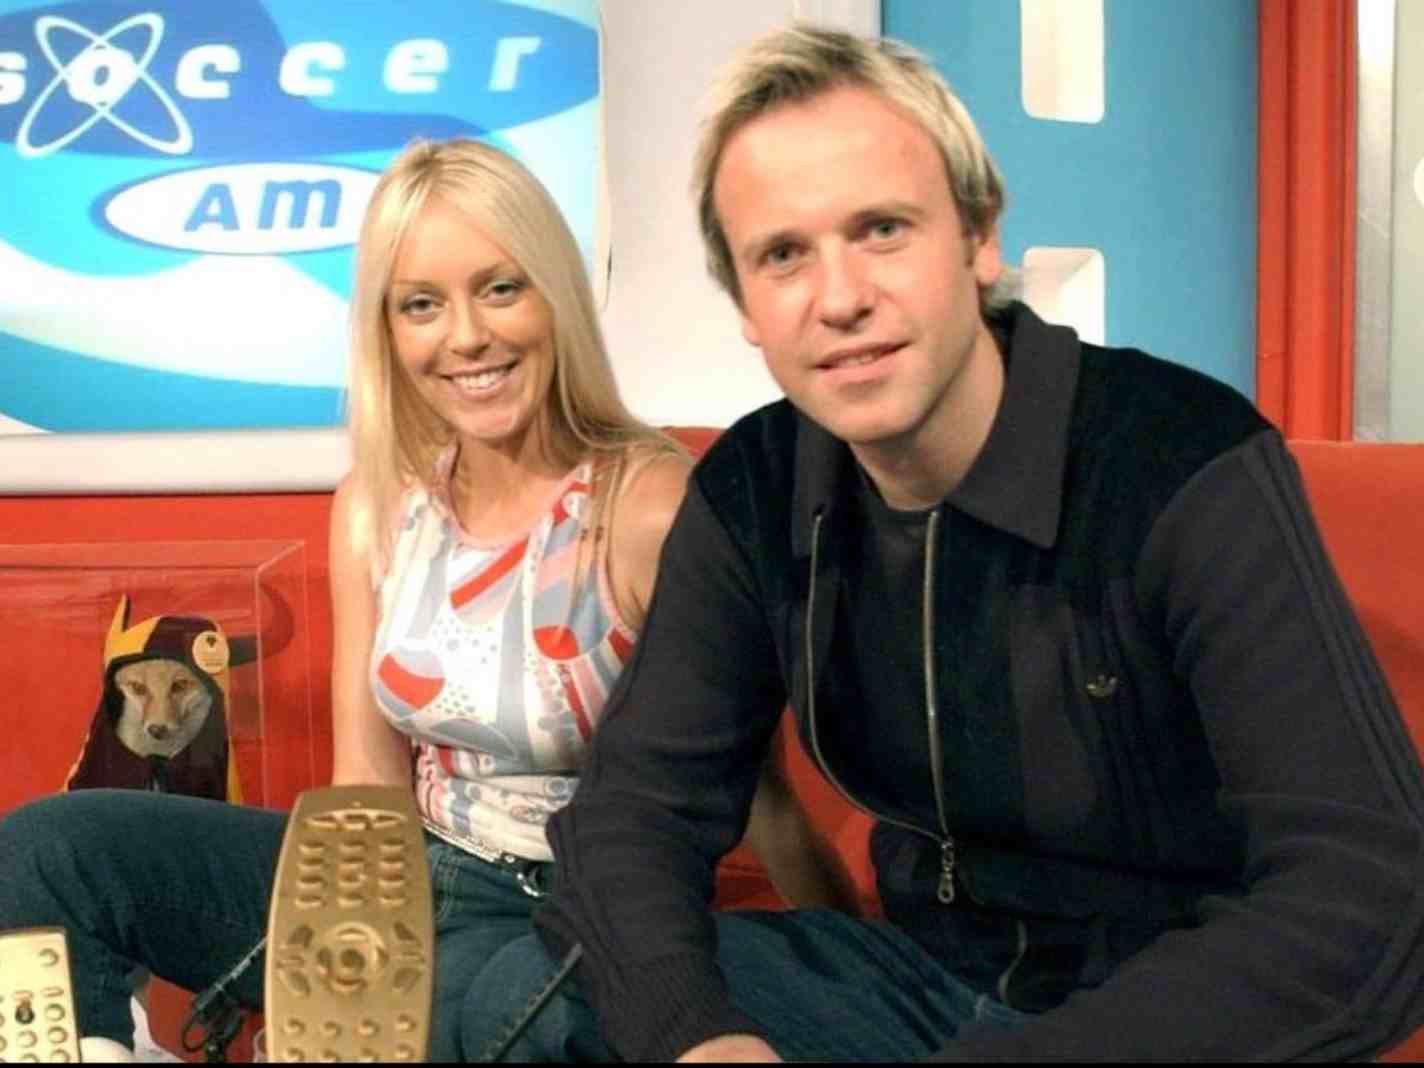 Football Twitter Mourns The Death Of Soccer AM